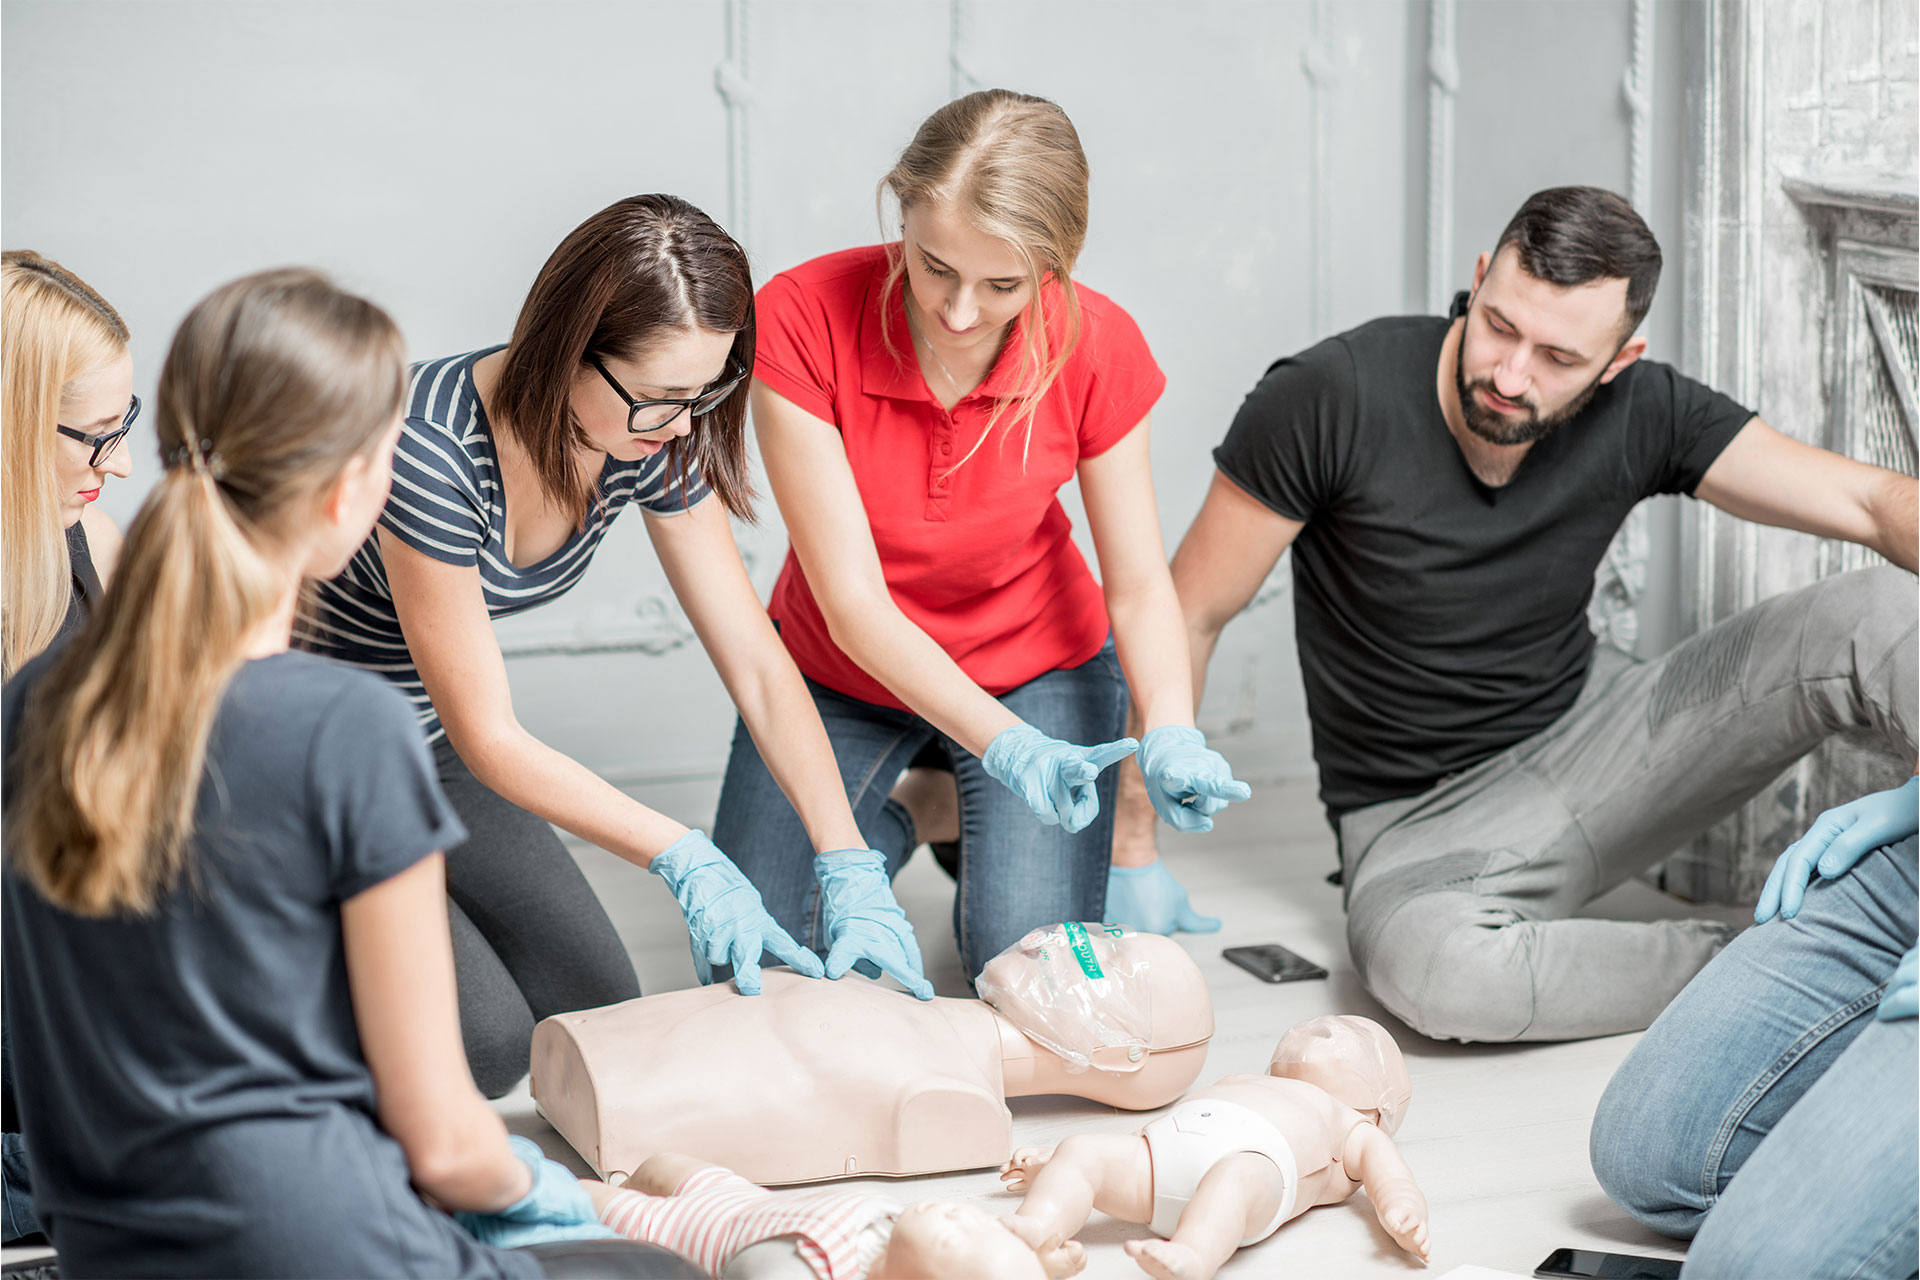 instructure teaching cpr to a group